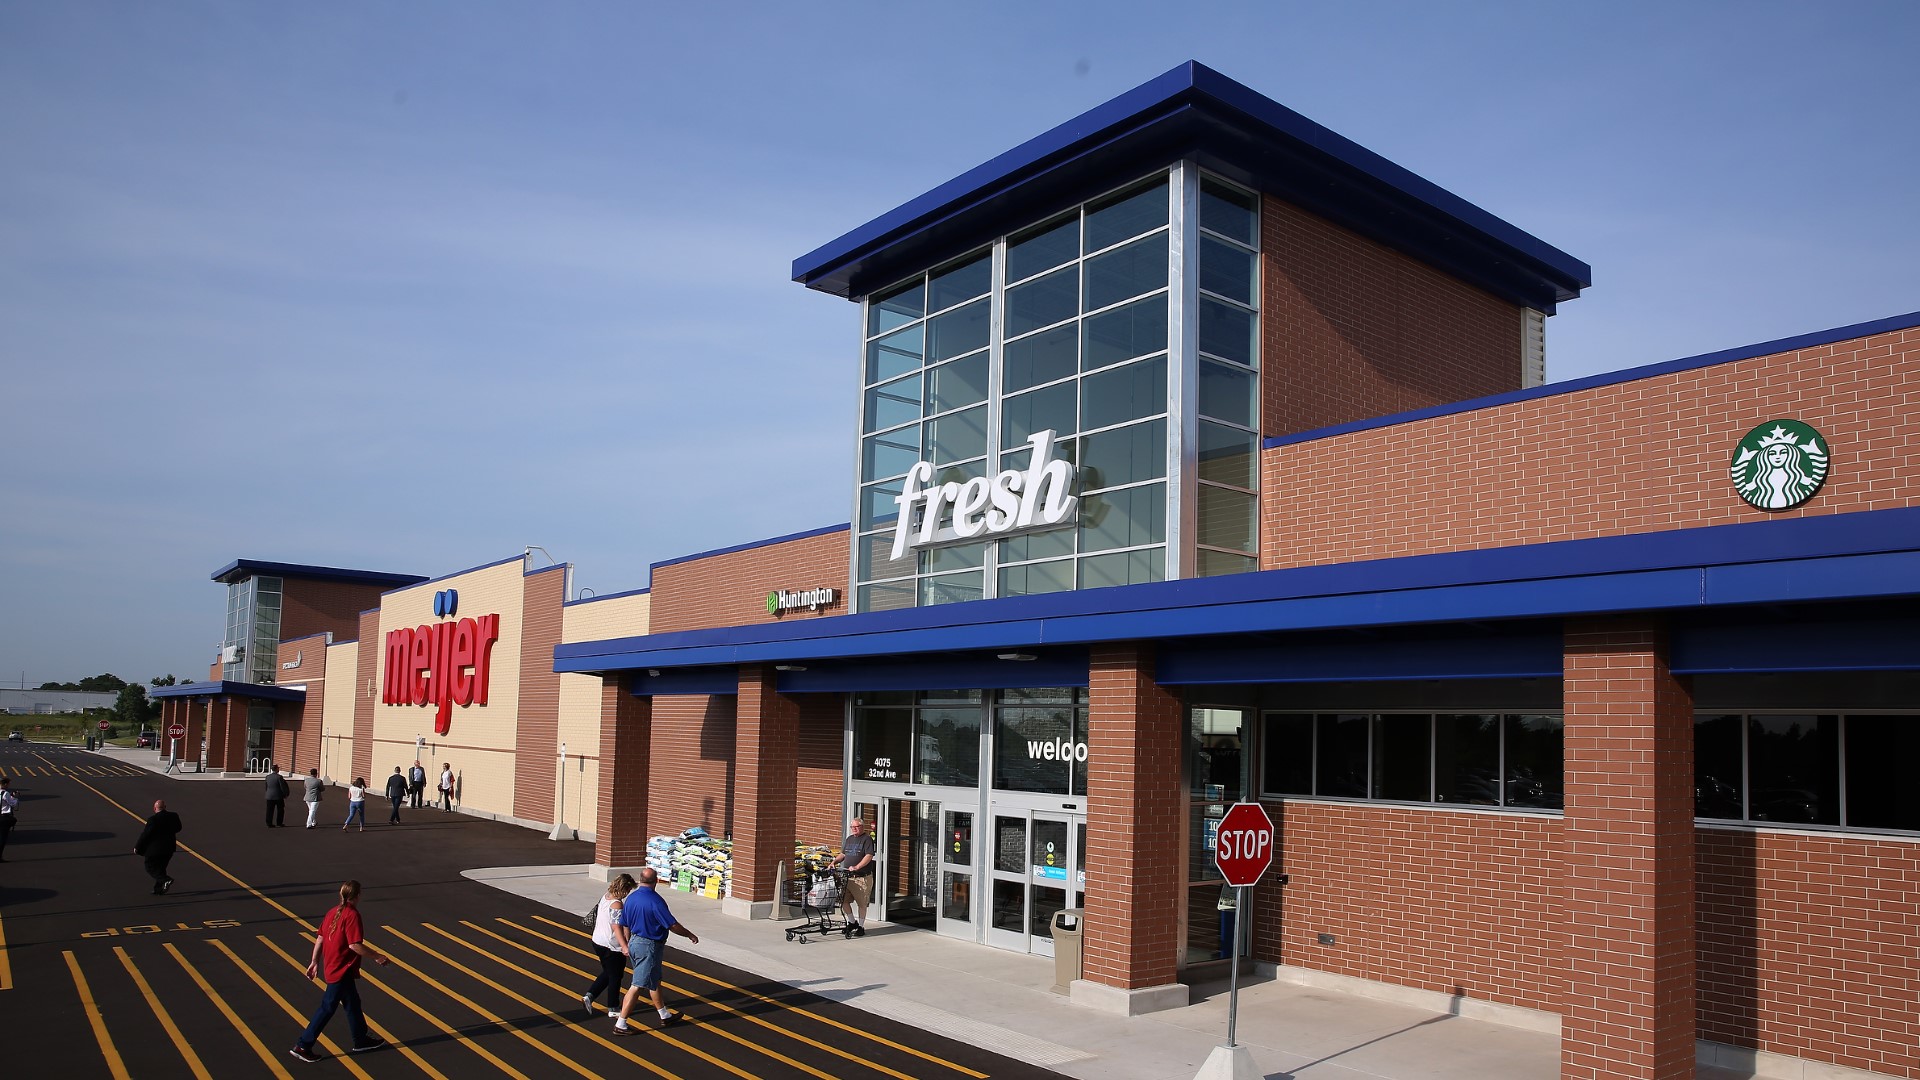 Meijer is opening a new 155,000 square-foot Fremont supercenter Tuesday, May 21.